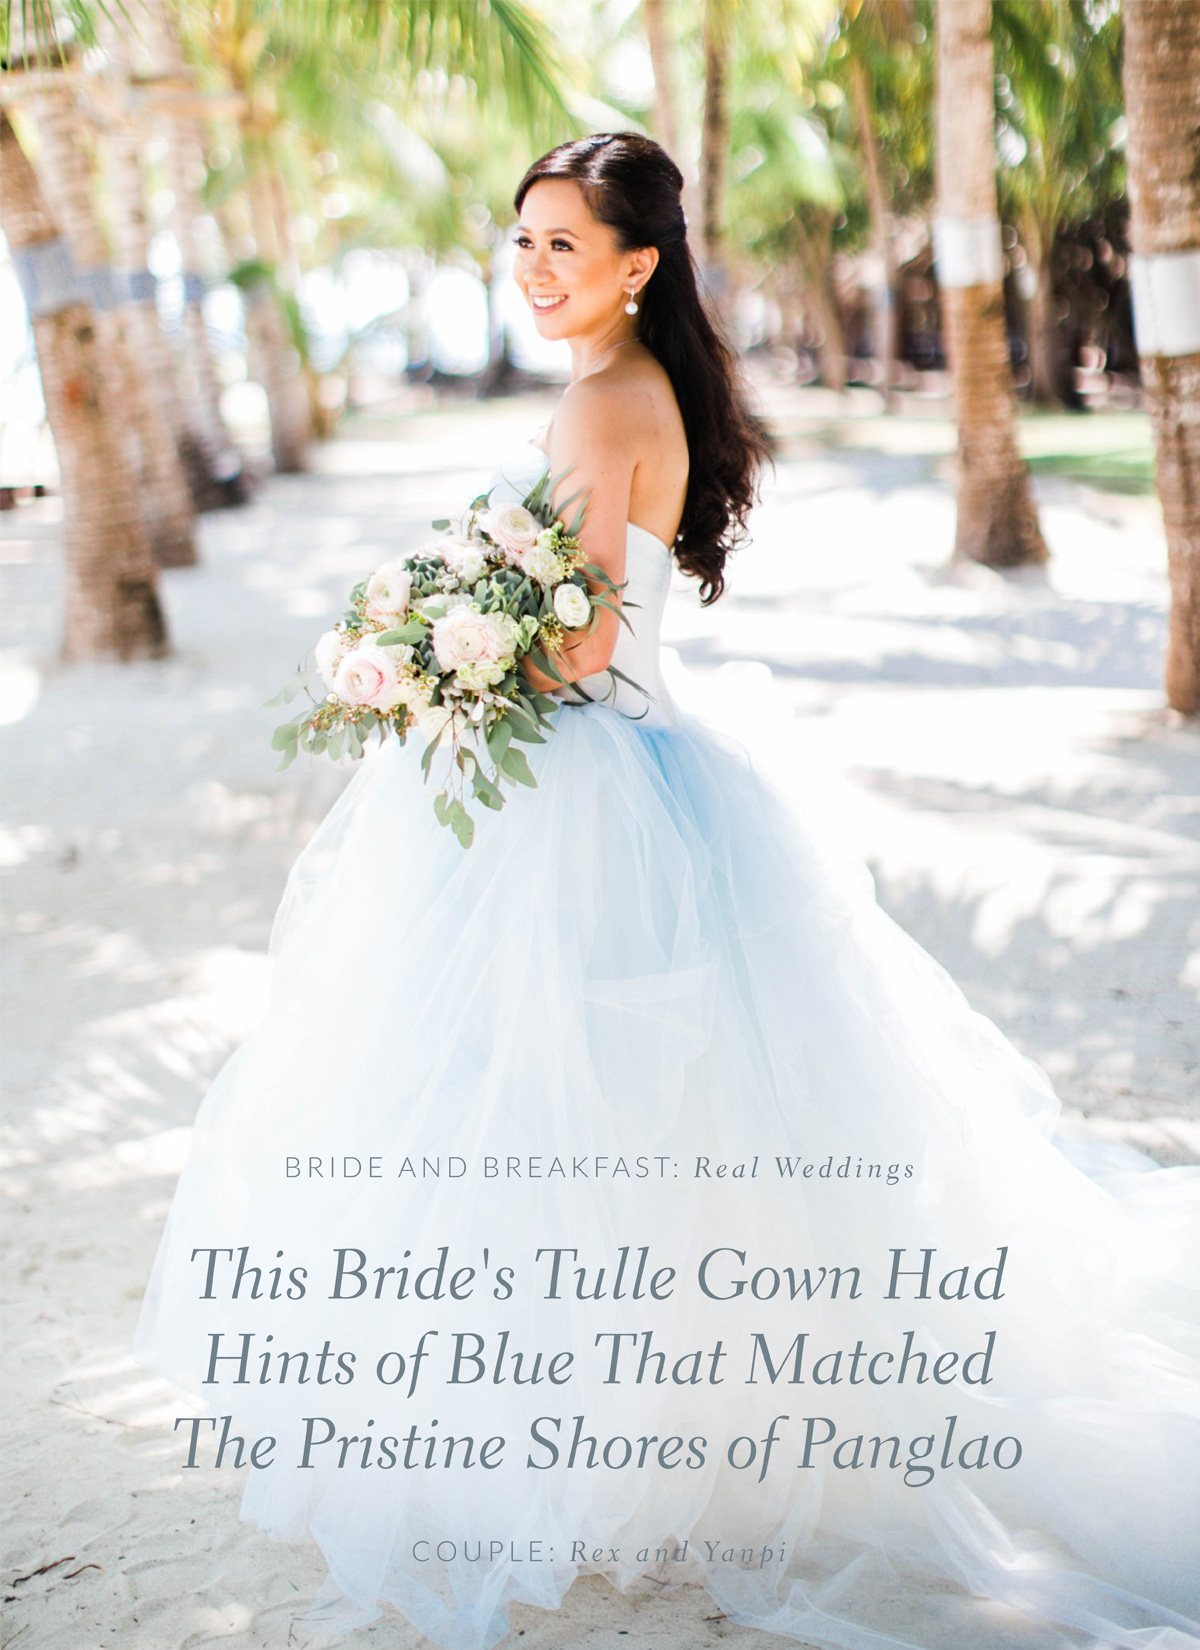 This Bride's Tulle Gown Had Hints of Blue That Matched The Pristine Shores of Panglao